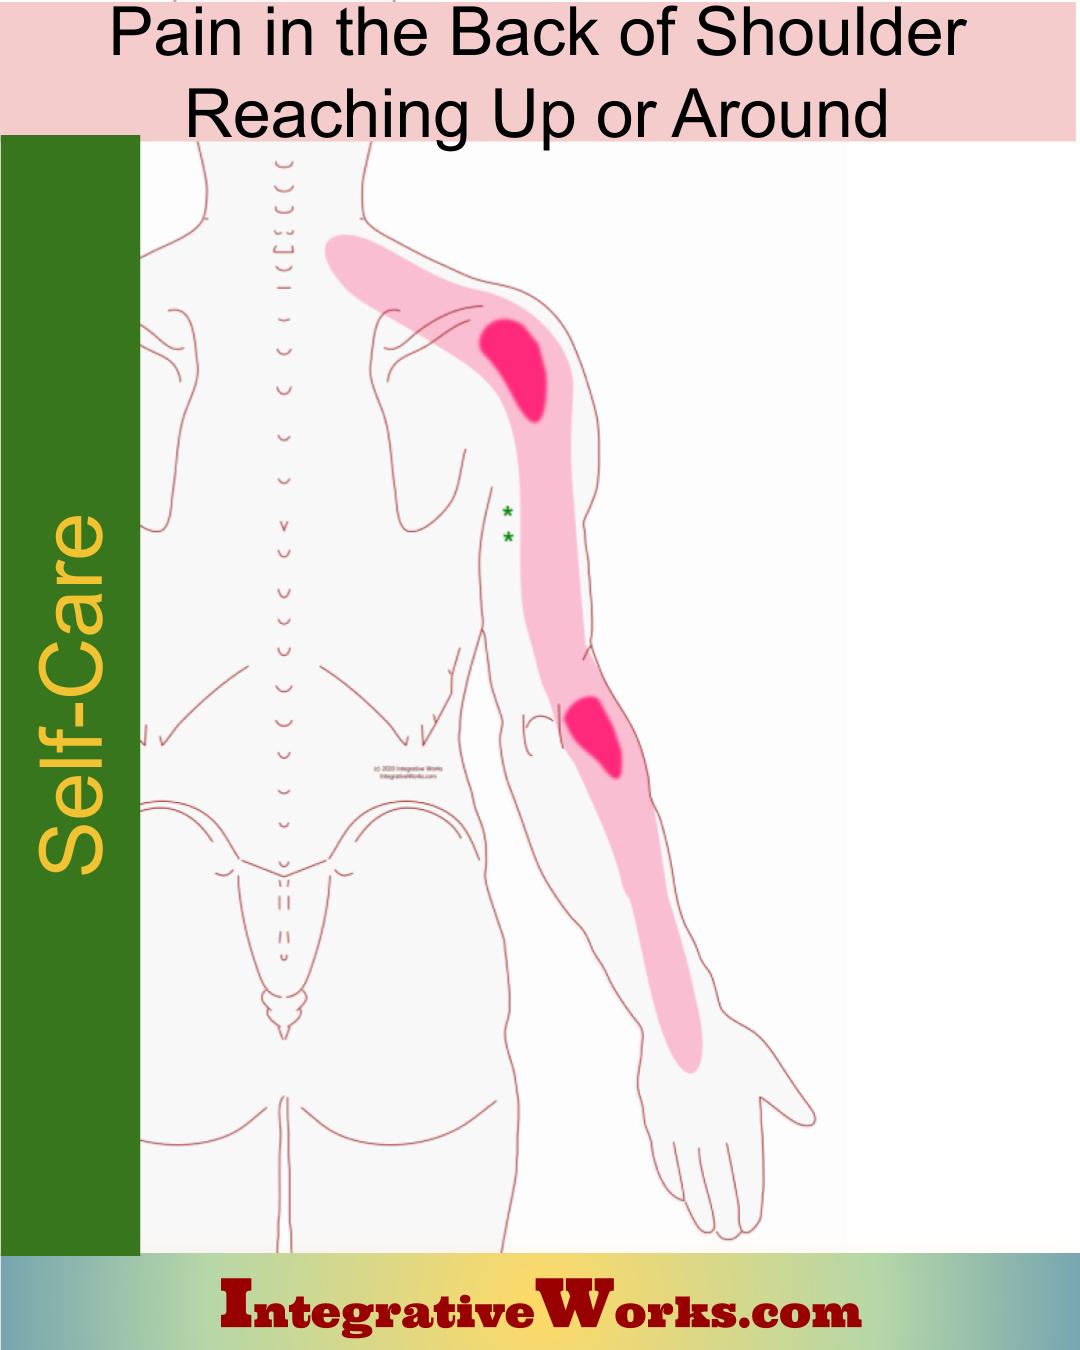 Self-Care – Shoulder Pain in Back, Reaching Up and Around